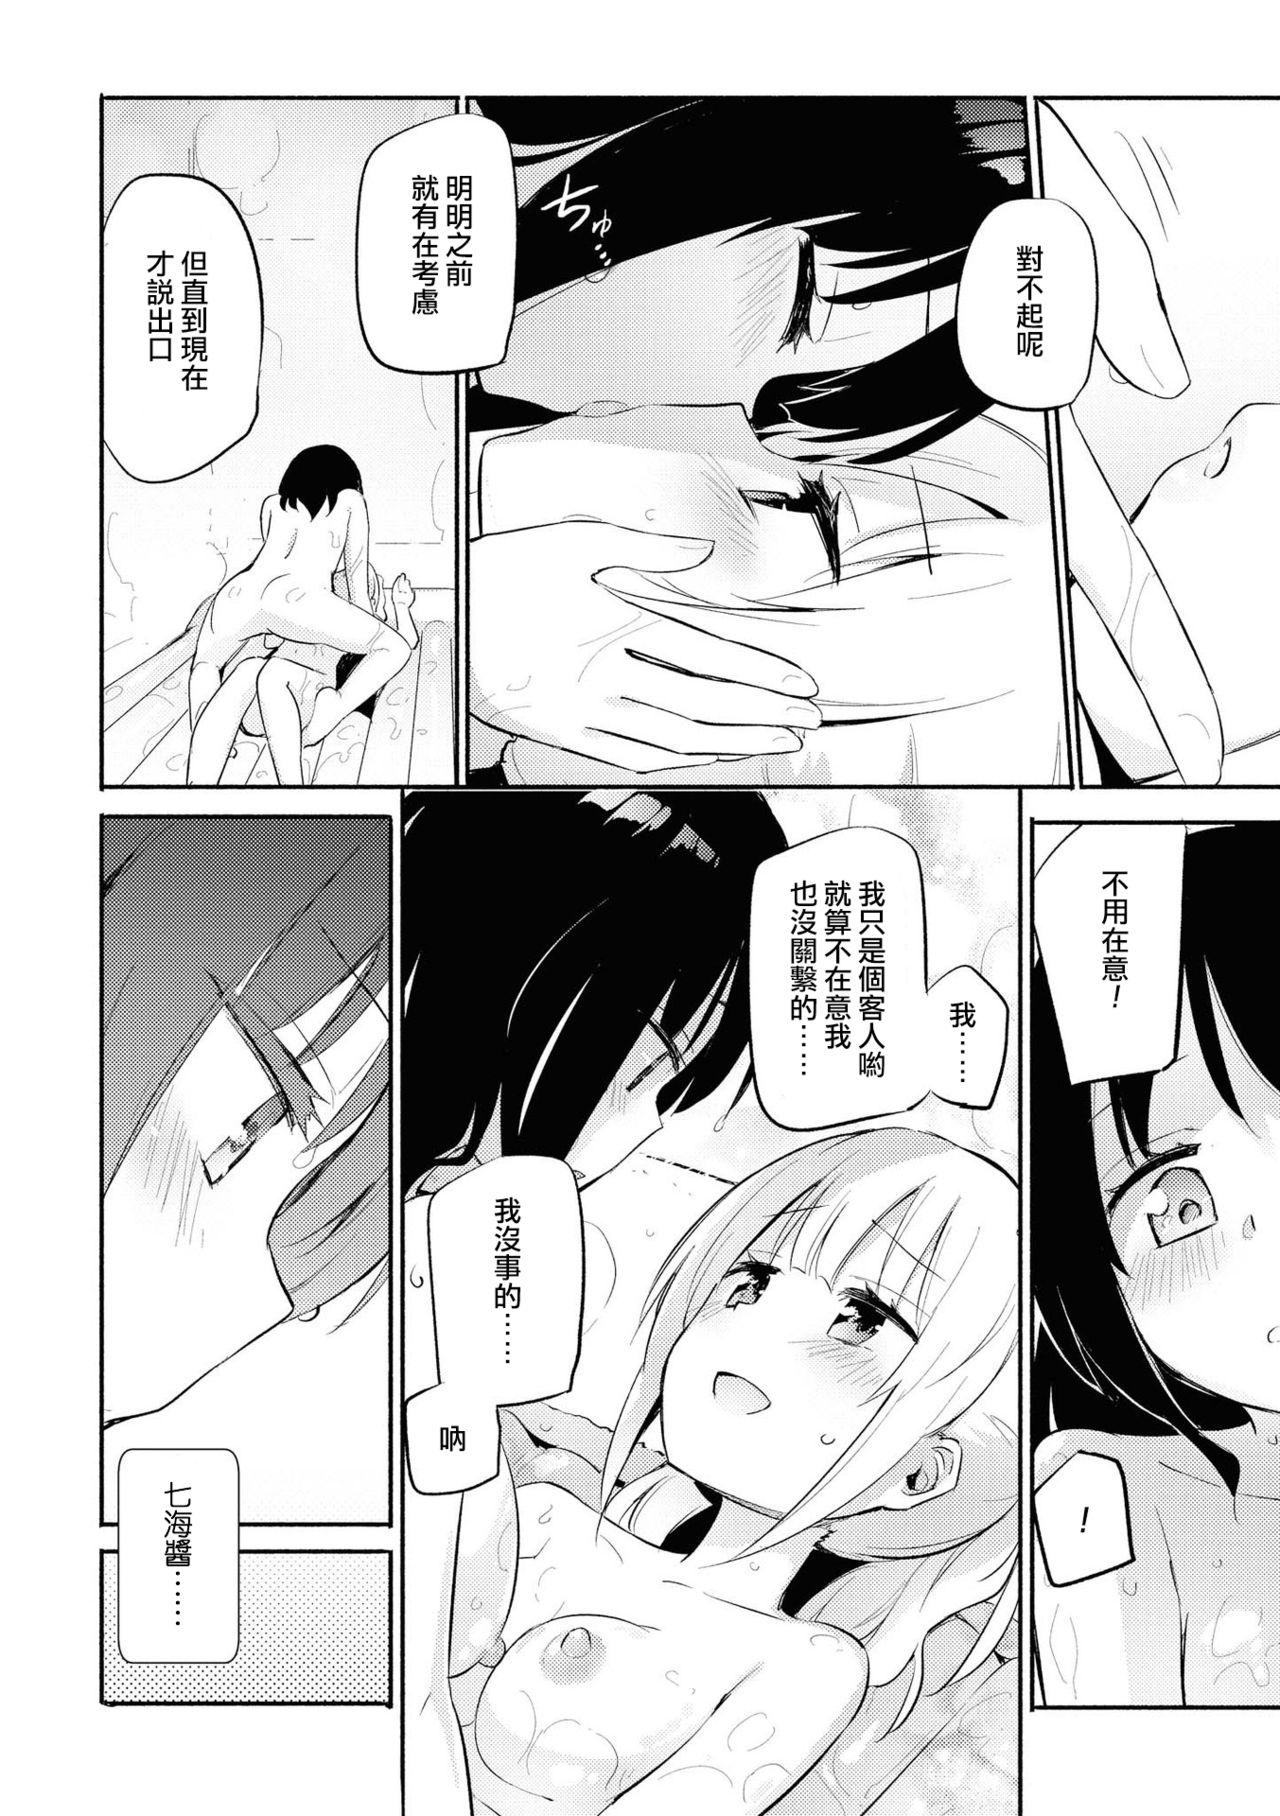 Russian Les Fuuzoku Anthology Repeater | 蕾絲風俗百合集 Ⅱ Tiny Tits - Page 12